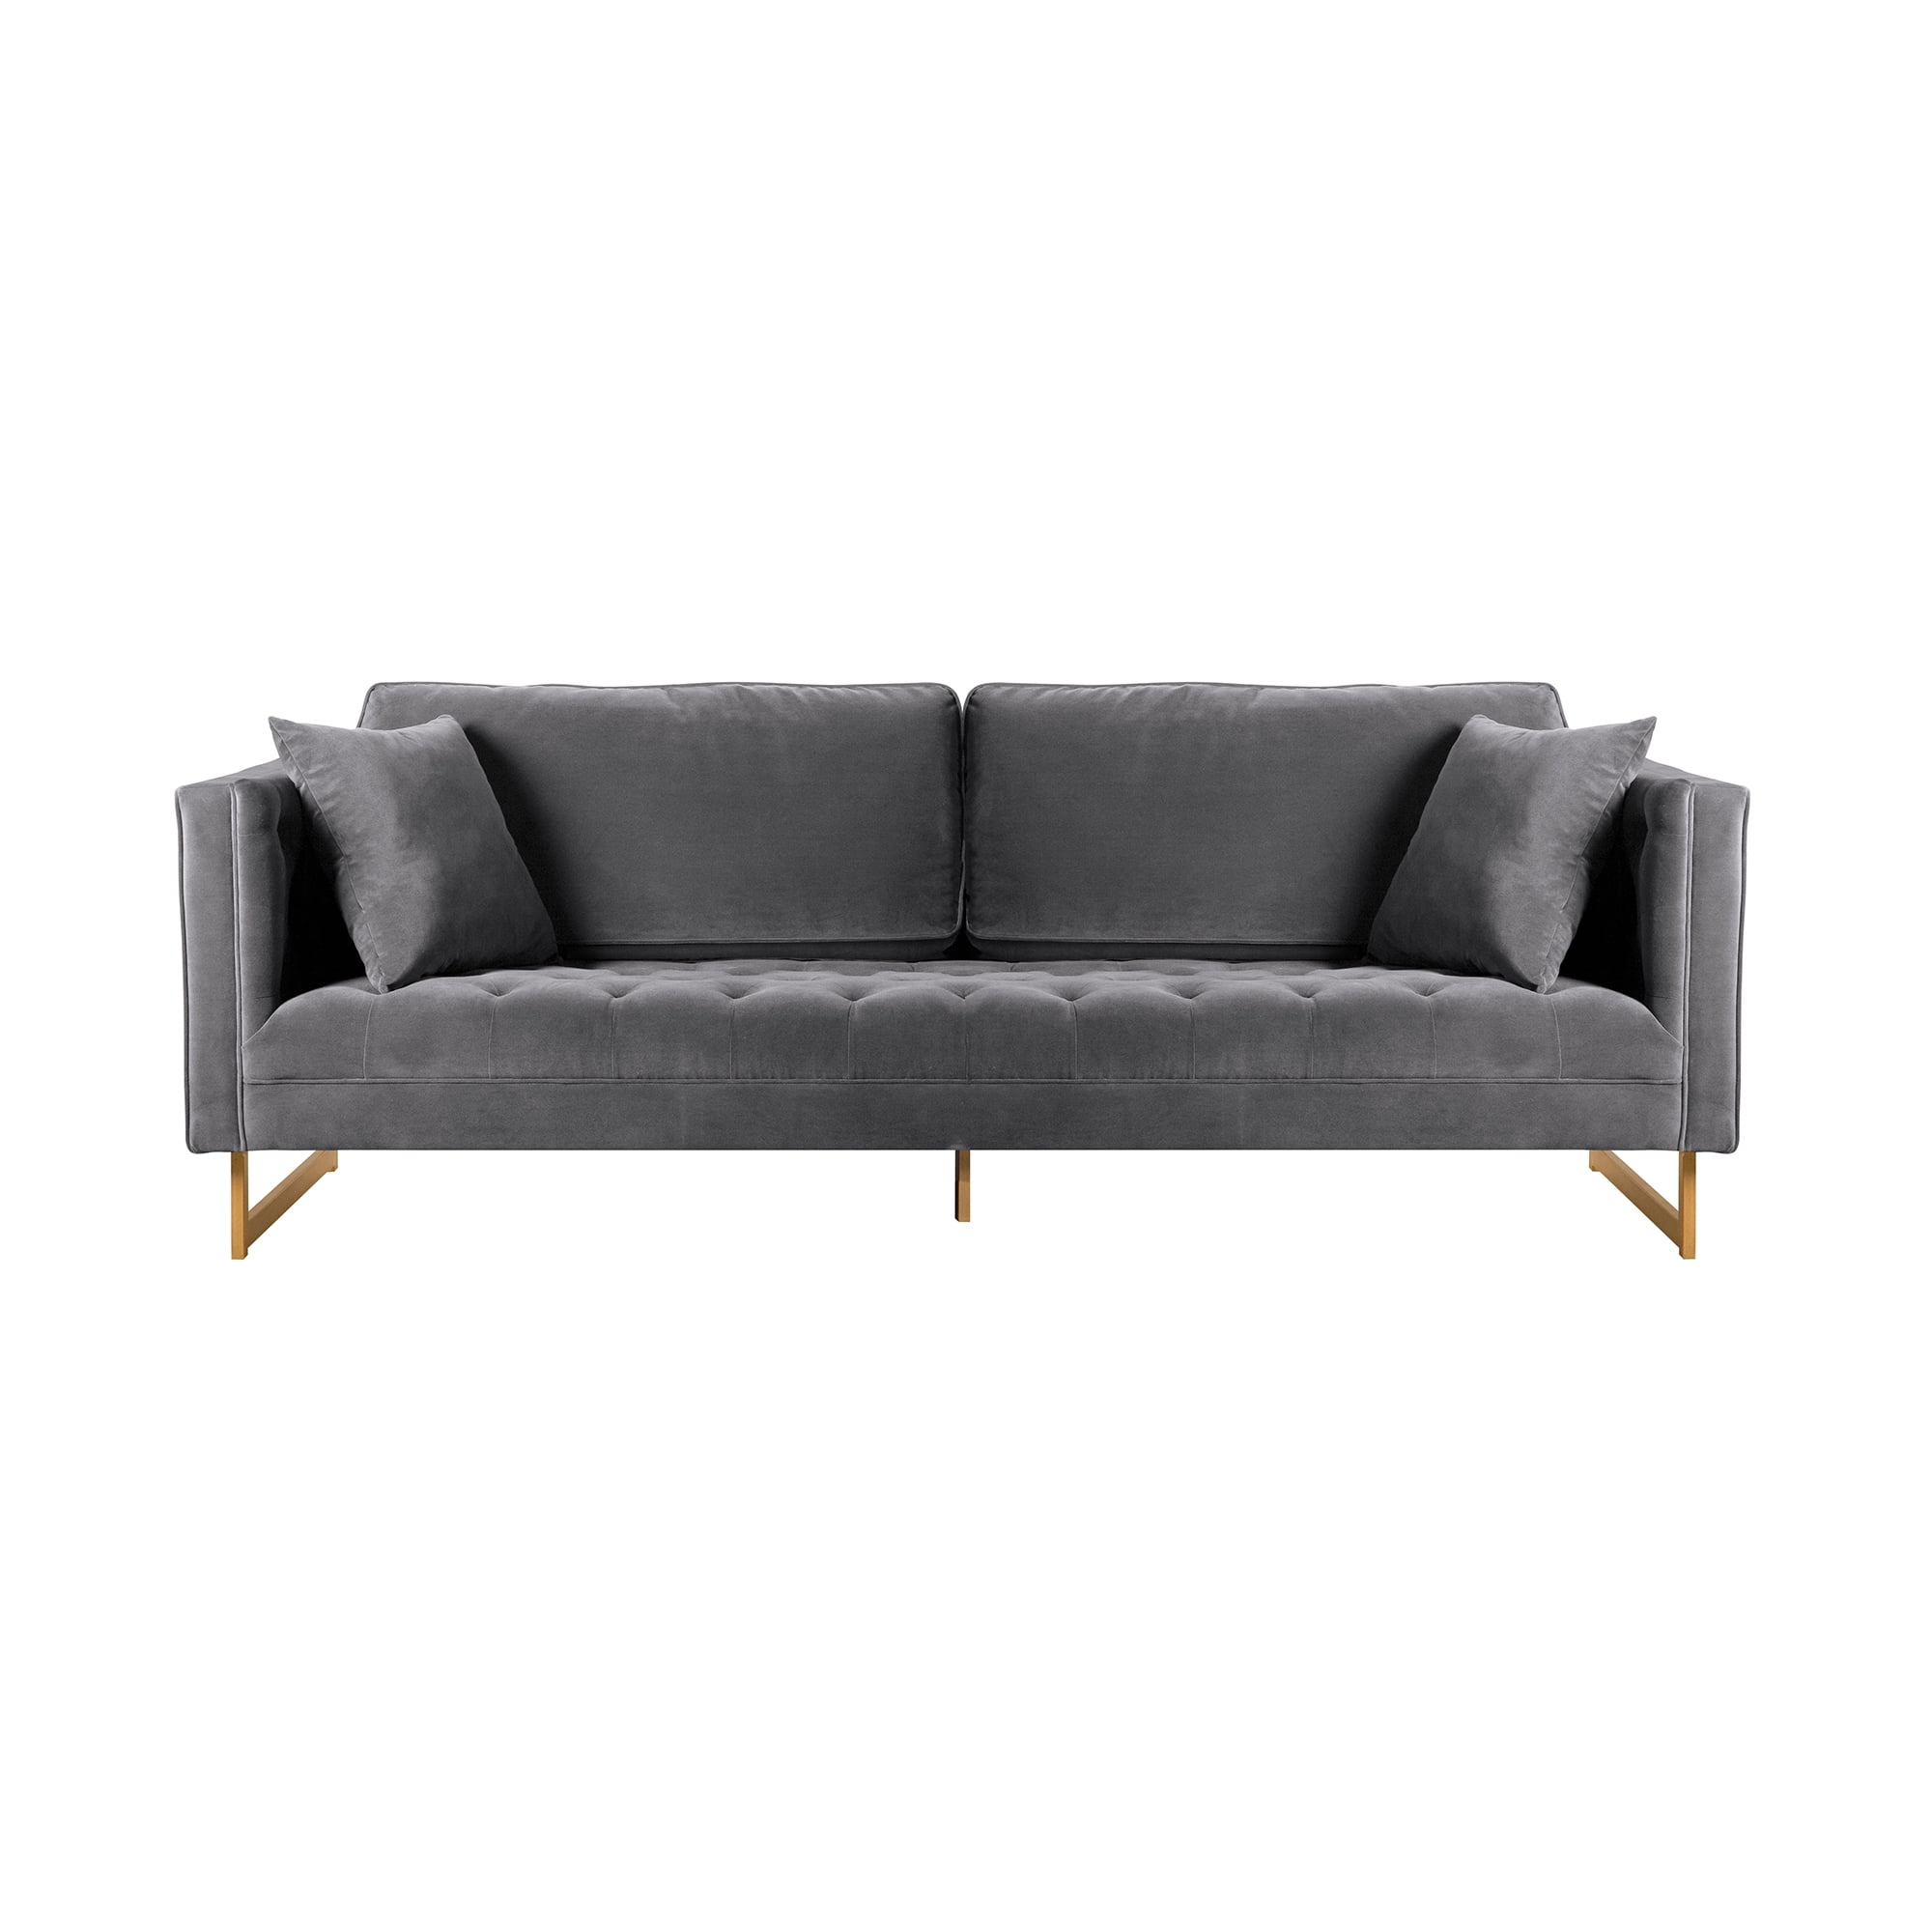 Picture of Armen Living LCLN3GRY 34.5 x 90 x 39.8 in. Lenox Grey Velvet Modern Sofa with Brass Legs